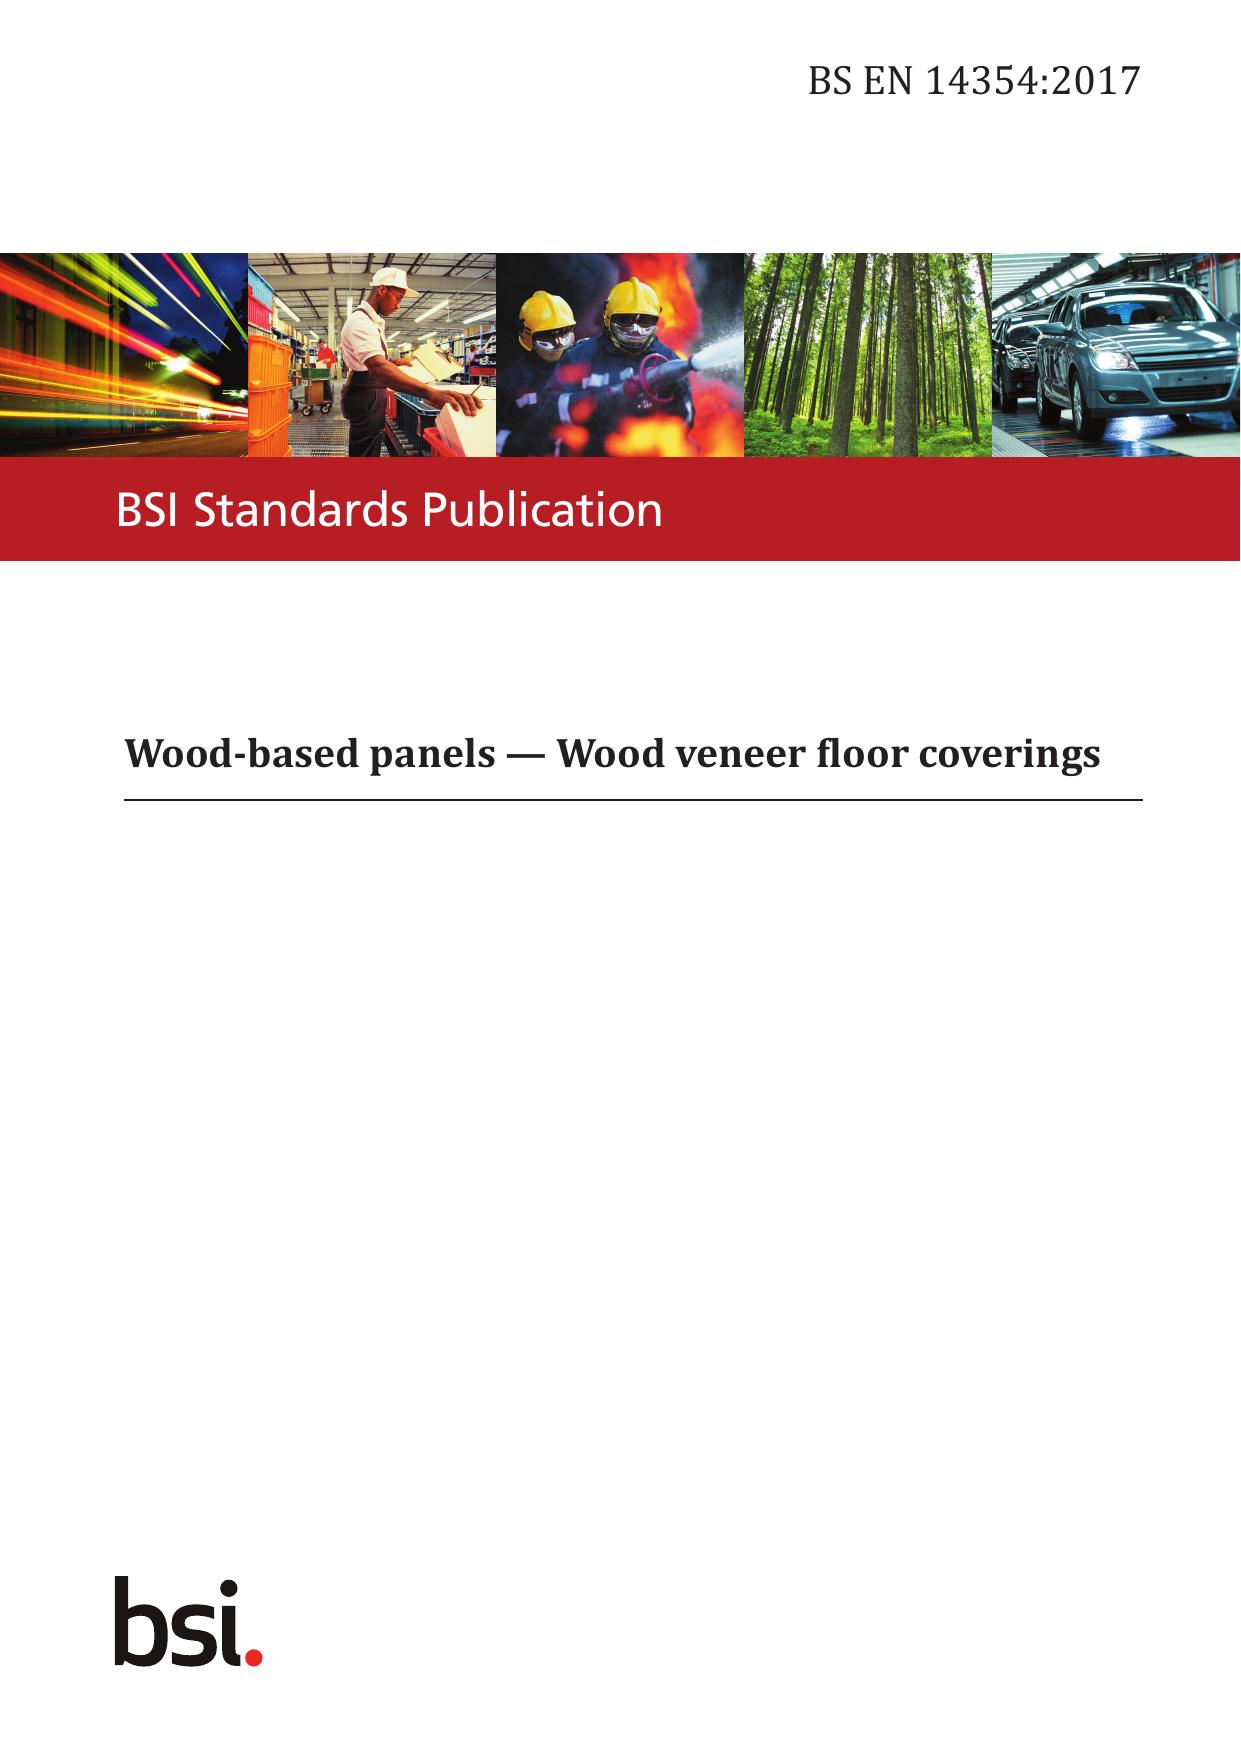 BS EN 14354:2017 by The British Standards Institution